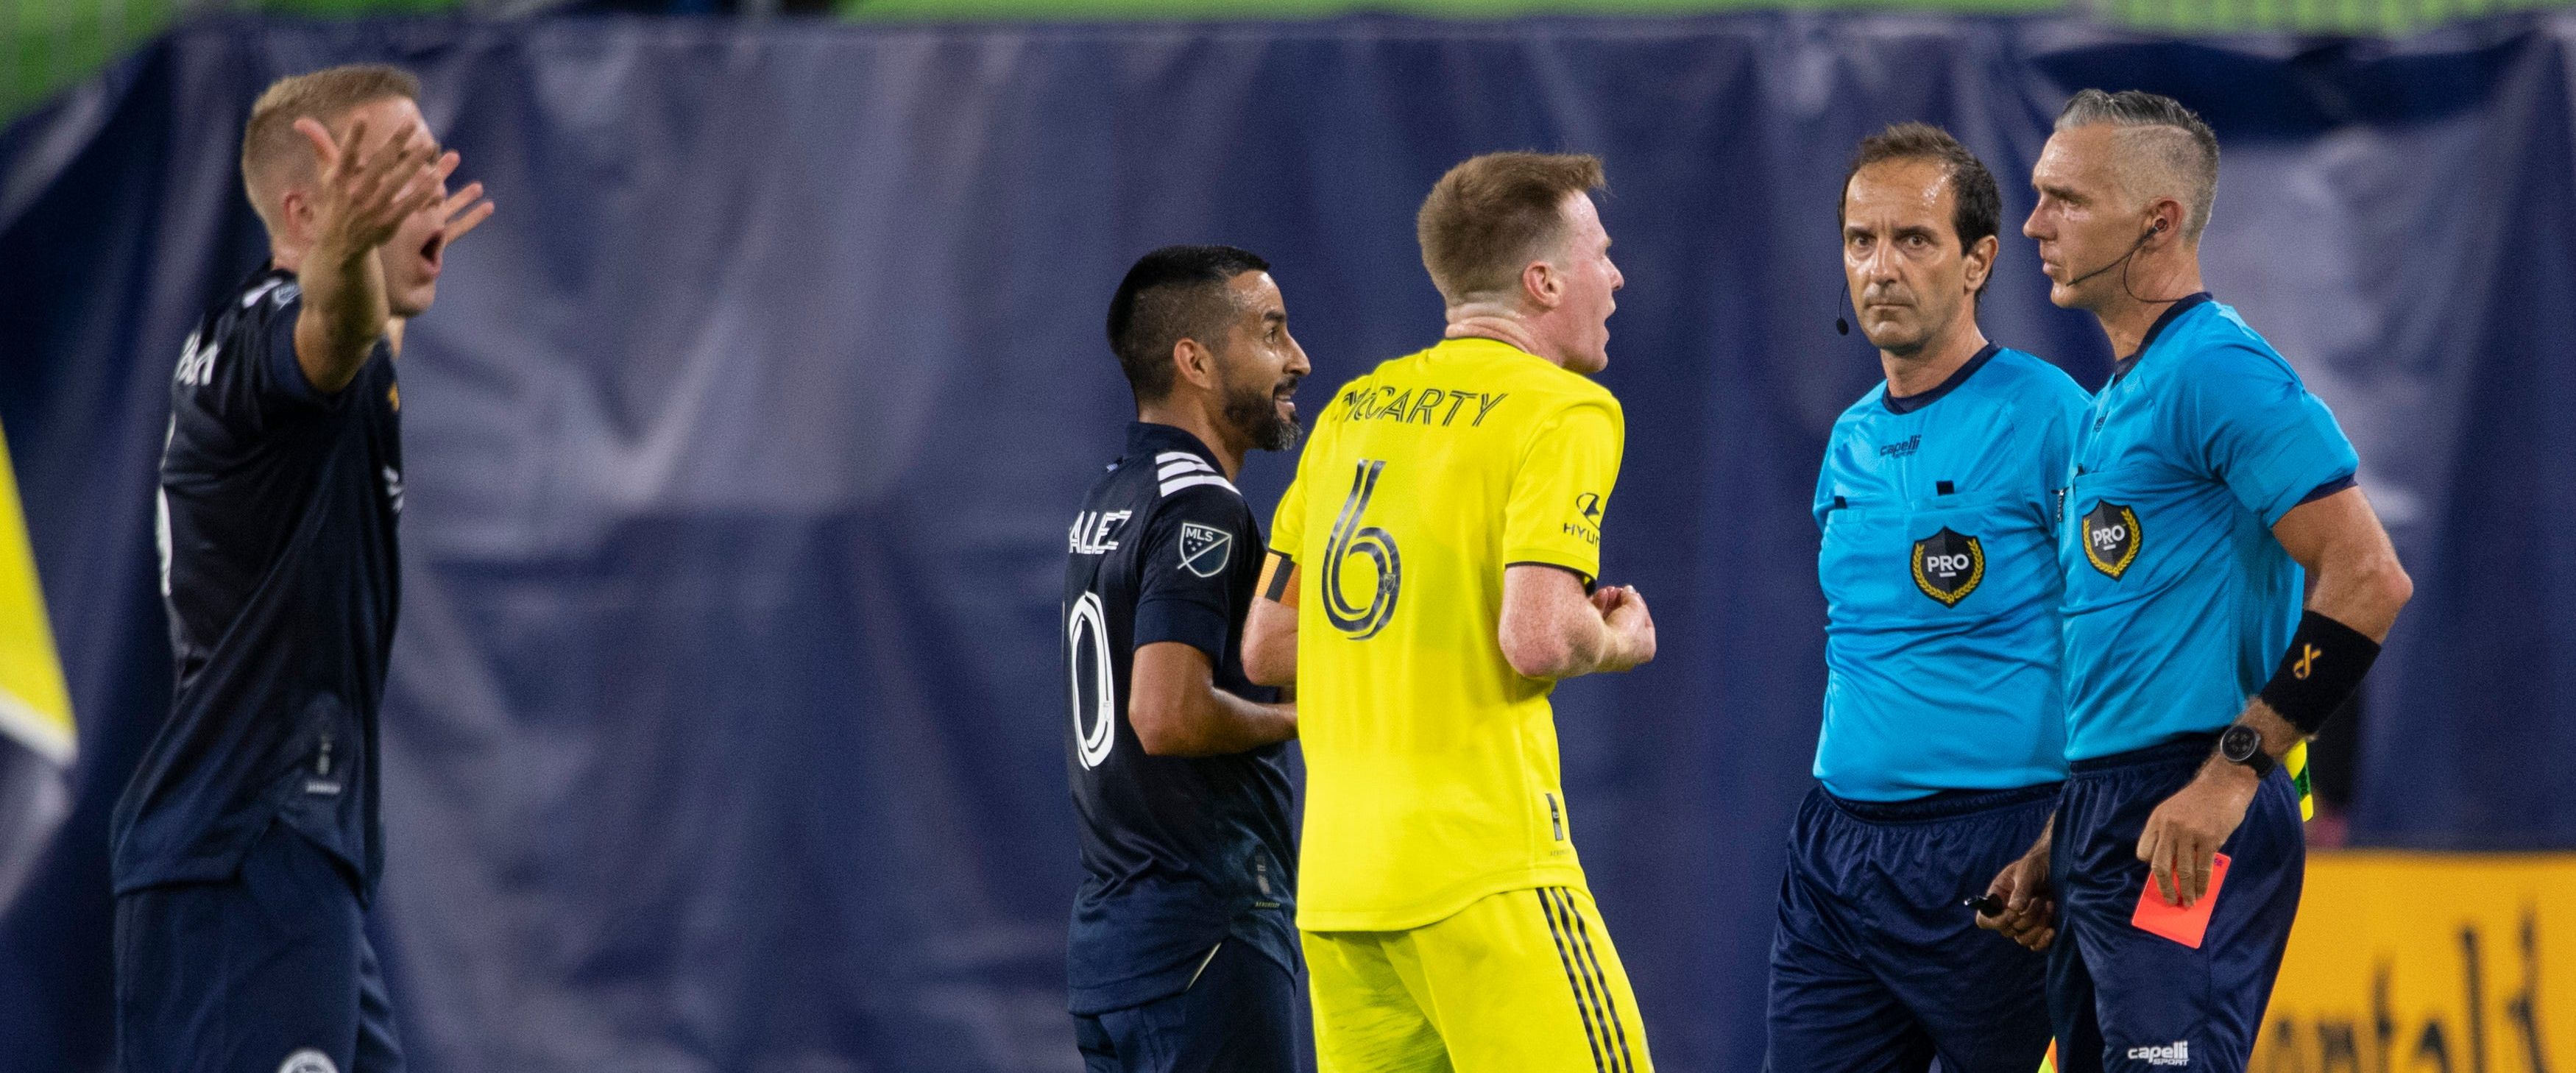 The fallout from Nashville SC's scrap with NYCFC is crazier than you might have expected